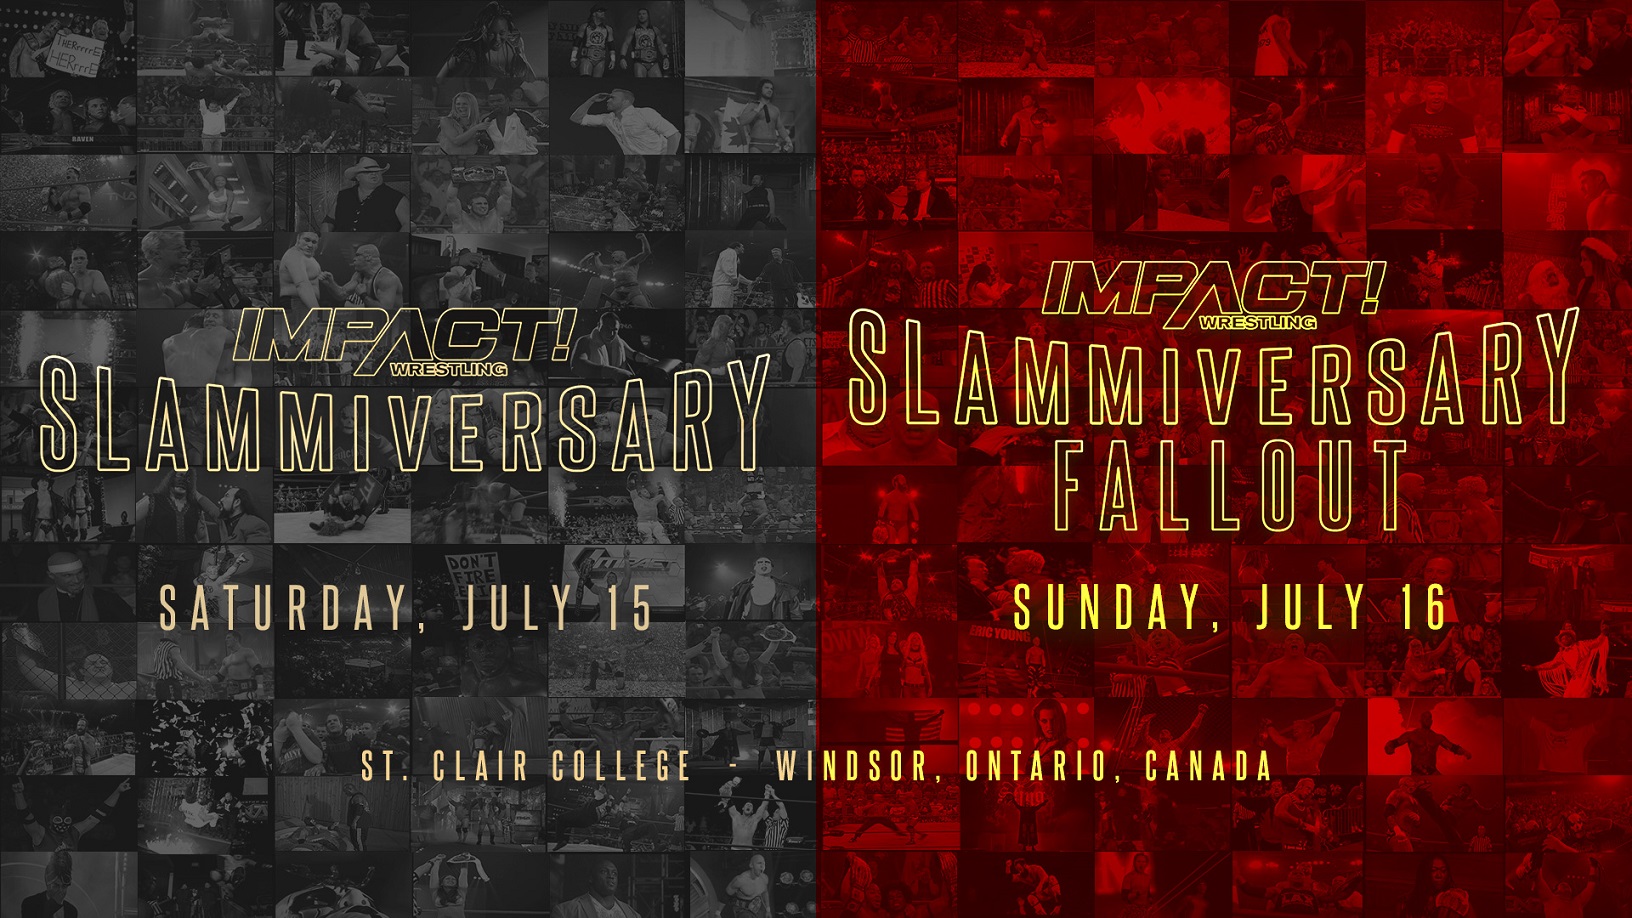 Tickets for Slammiversary Weekend July 15 & 16 in Windsor, Ontario On-Sale Now